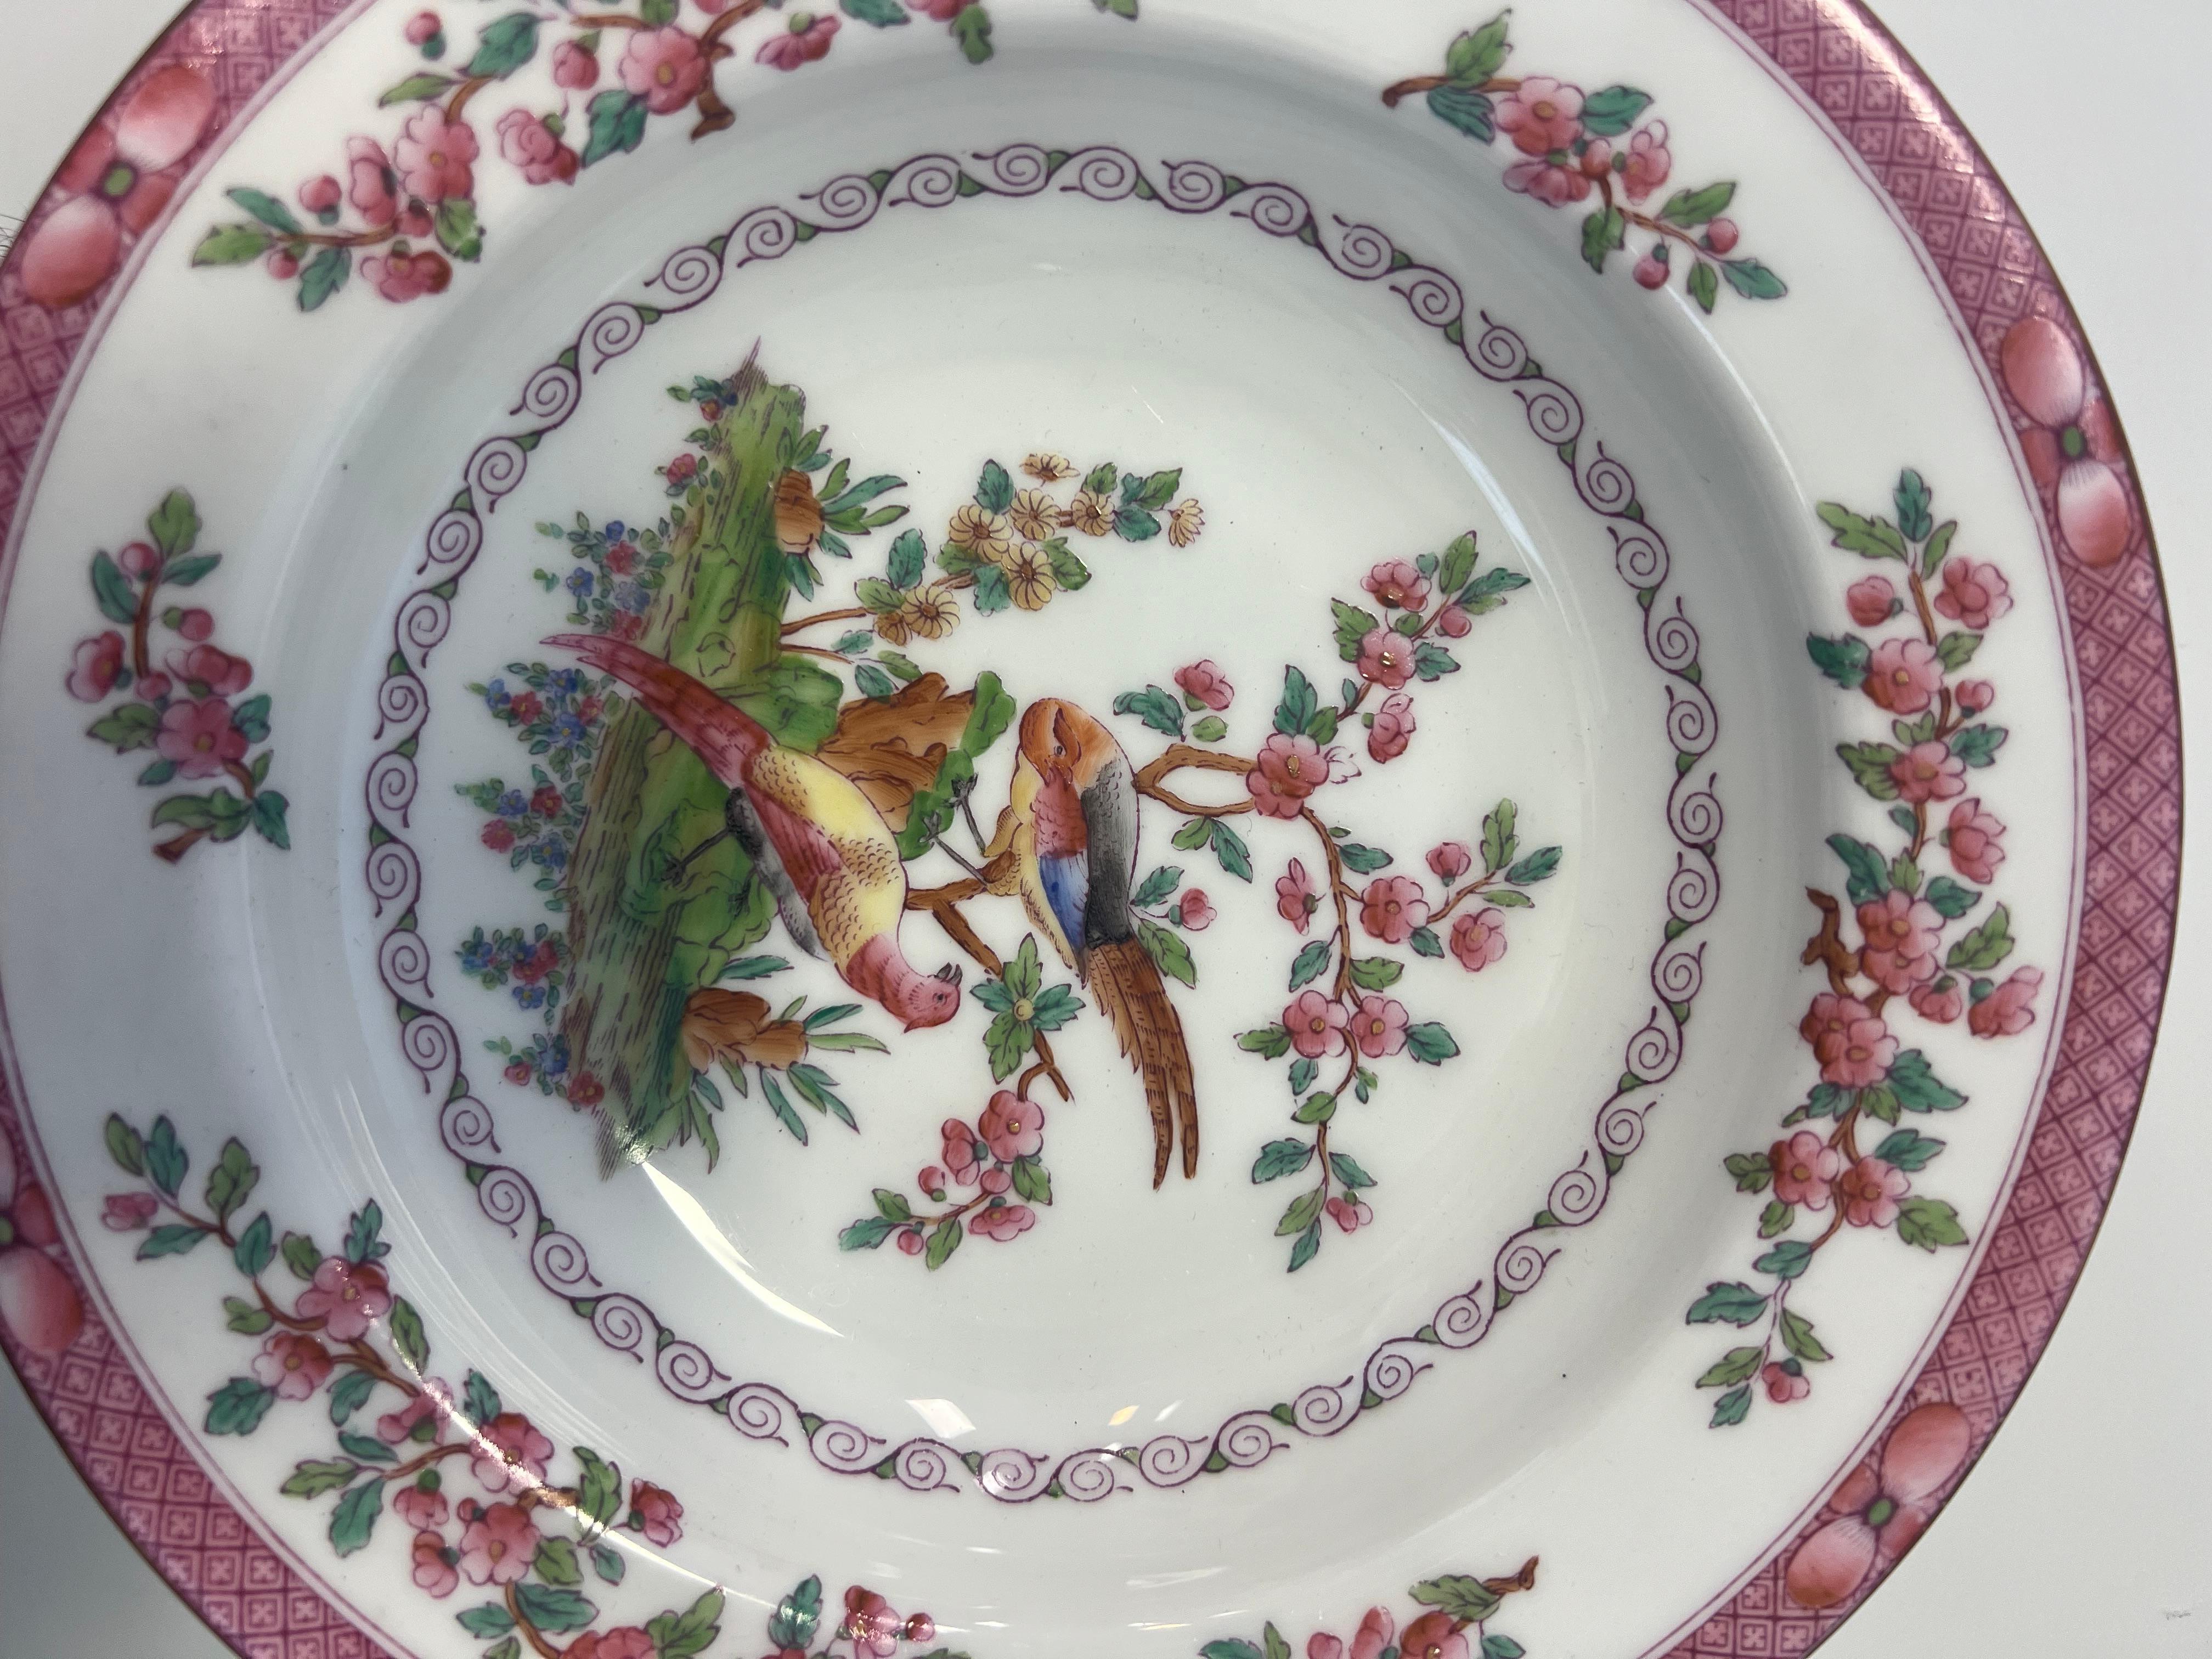 English Royal Worcester Porcelain Plated Retailed by Tiffany & Co, Circa 1900 In Excellent Condition For Sale In Los Angeles, CA